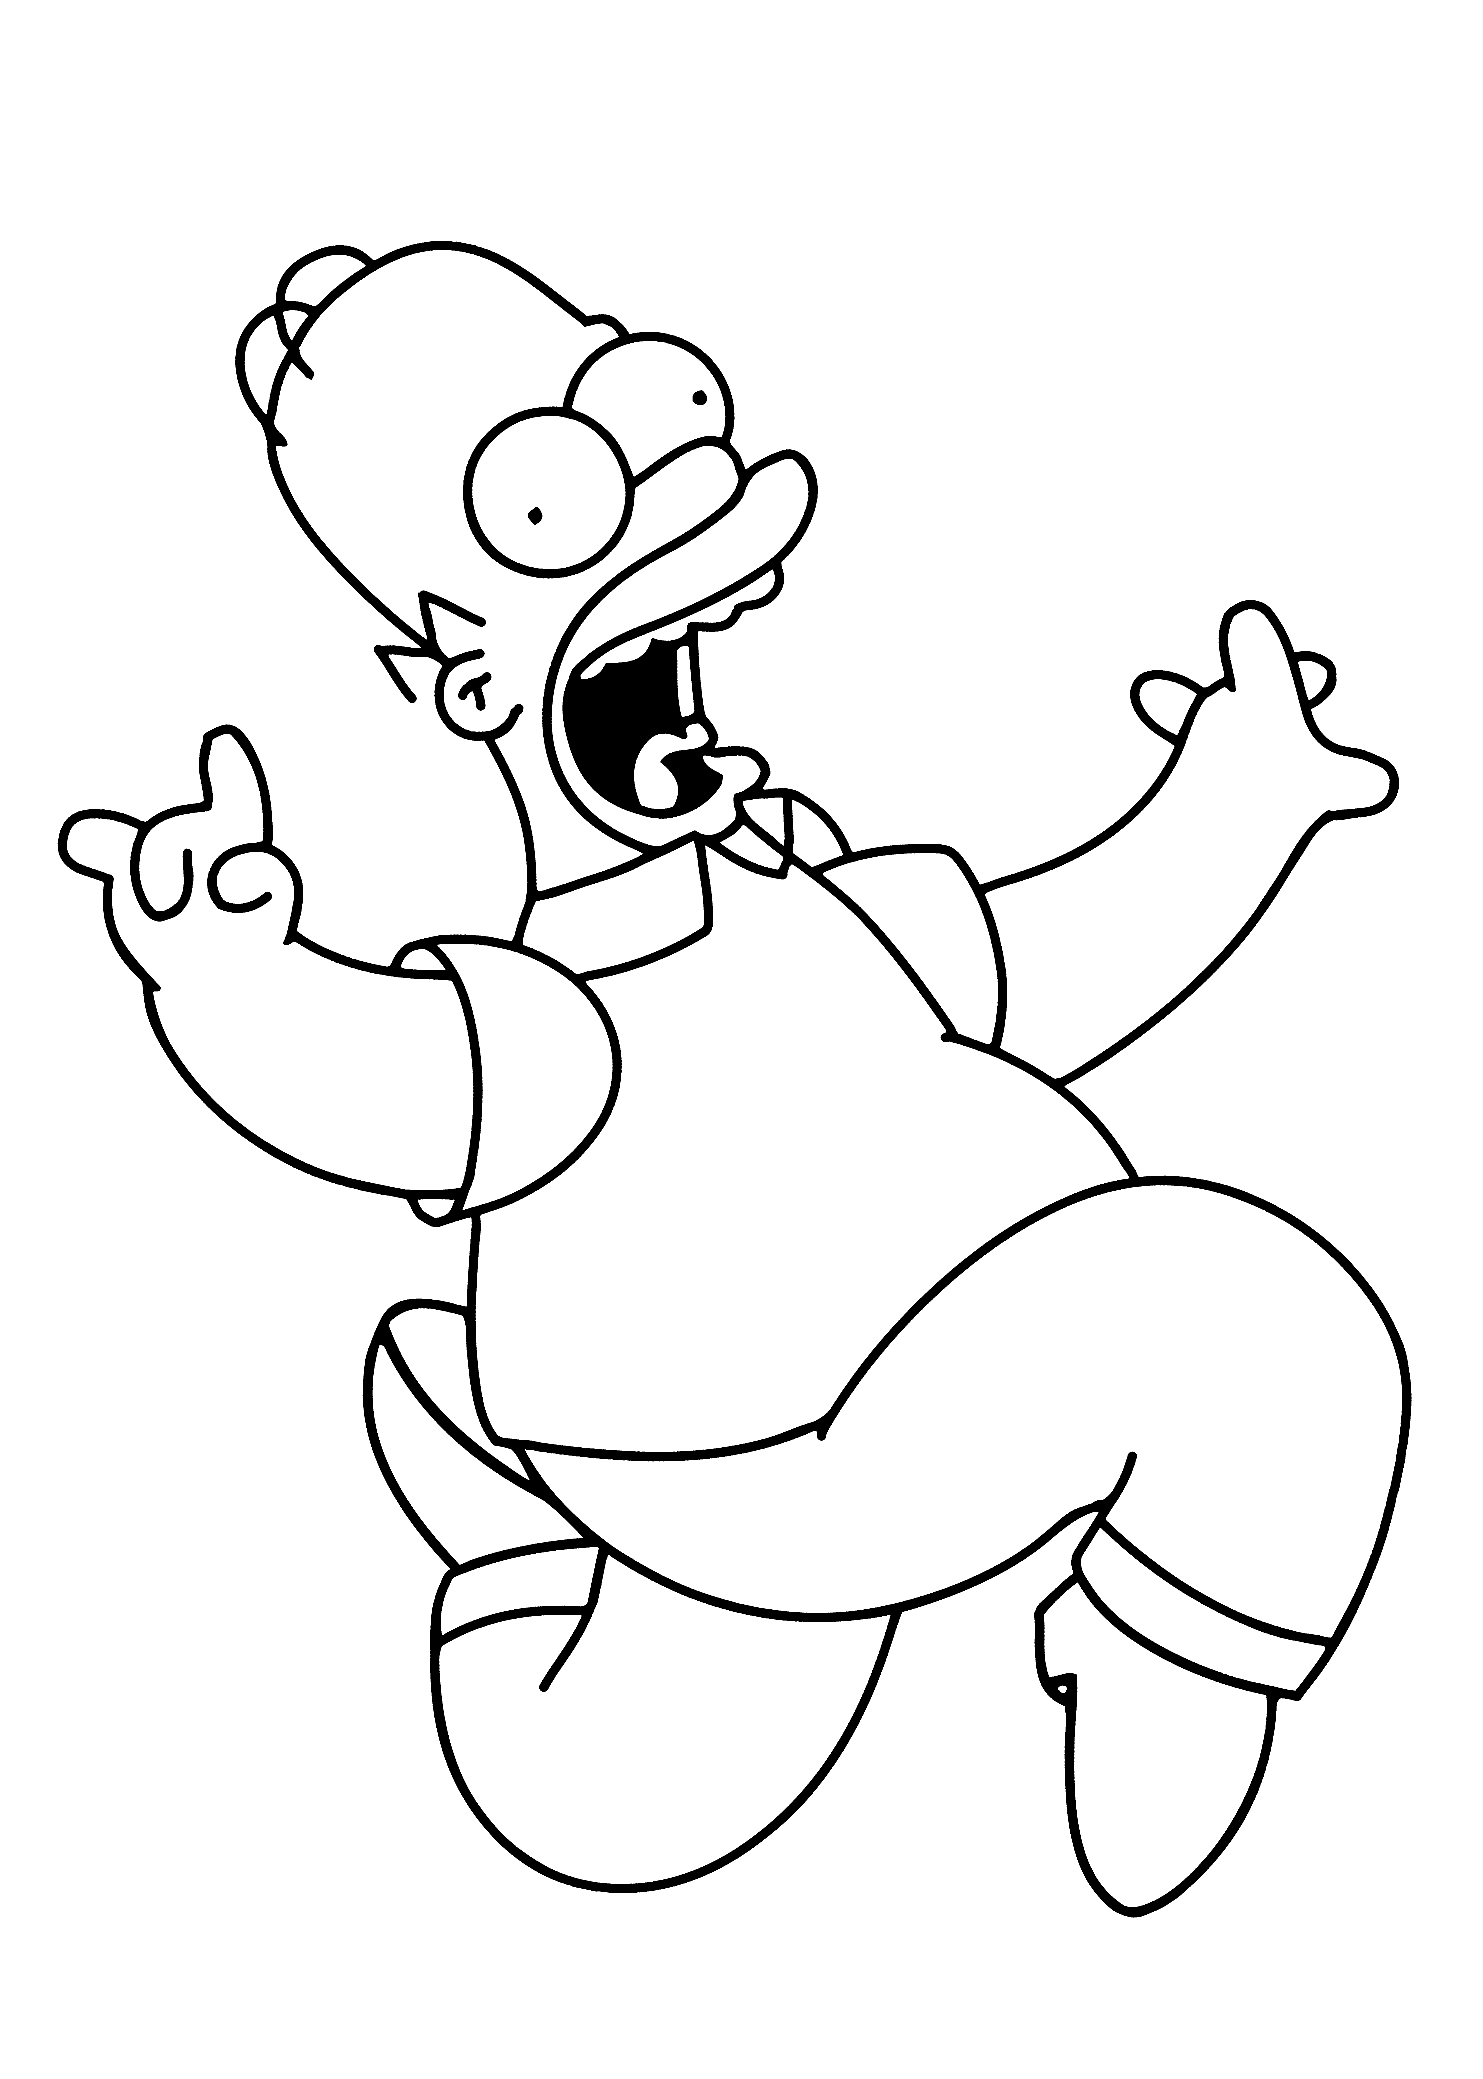 The Simpsons Coloring Pages Simpsons Coloring Pages Bart Simpson Coloring Pages Coloring 19750